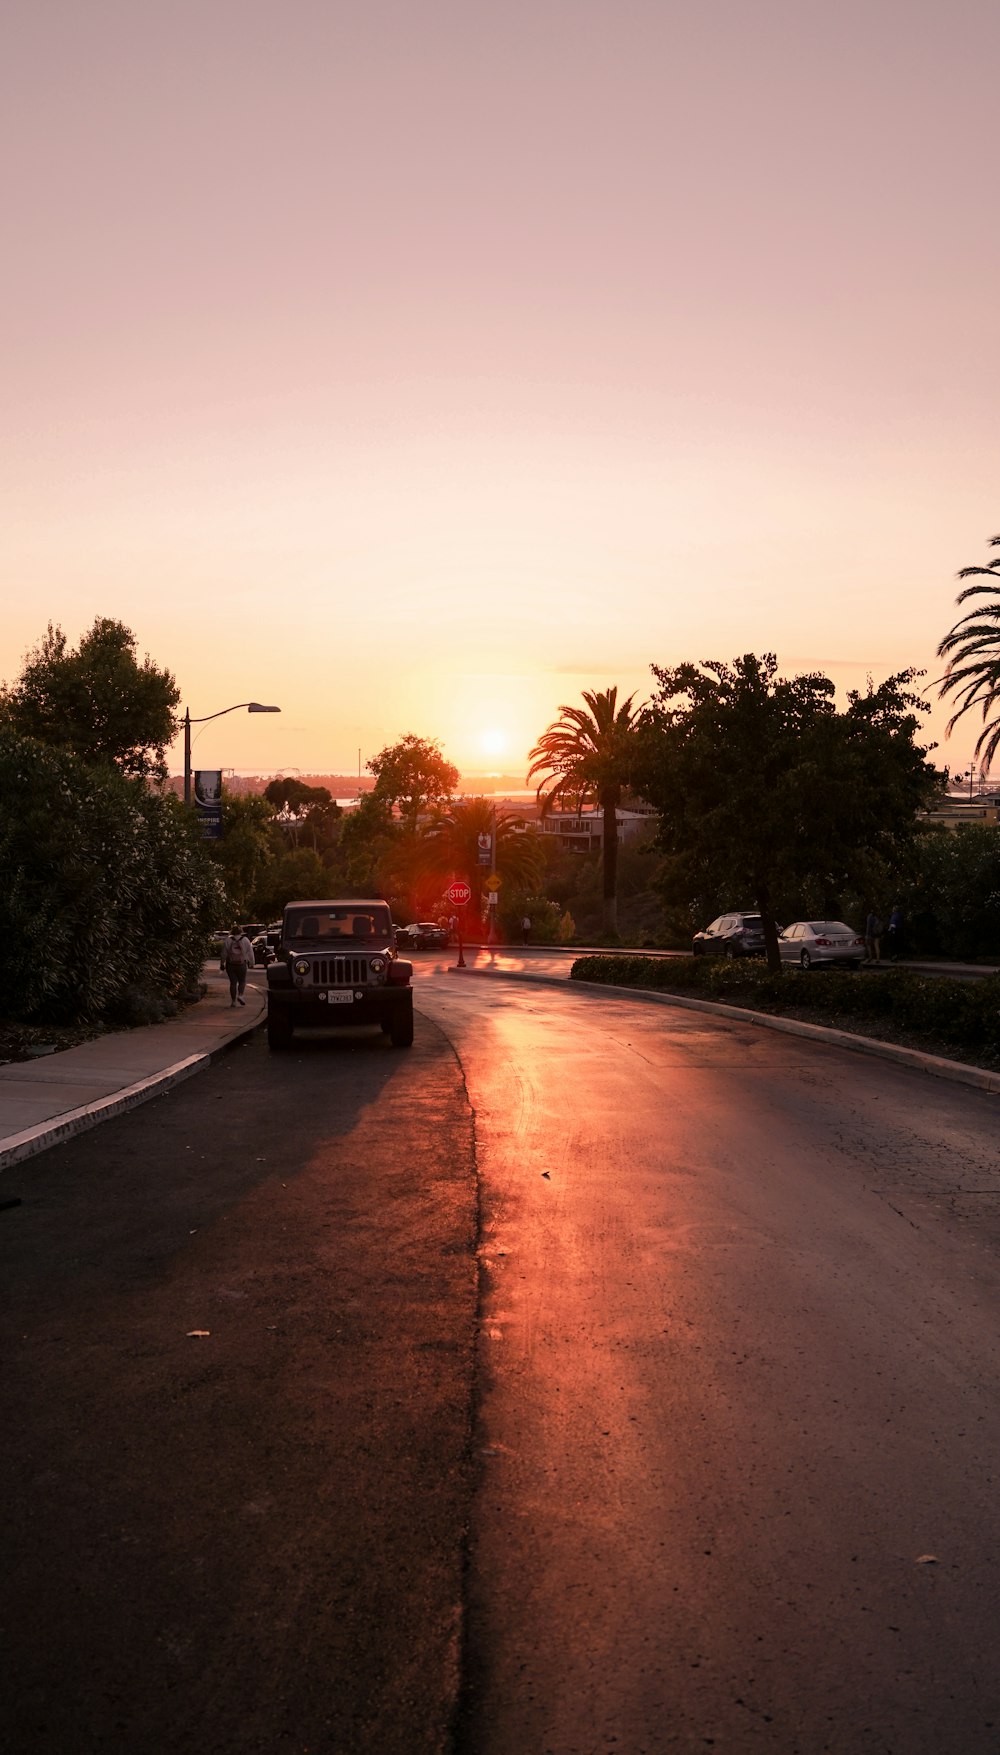 the sun is setting over a street with cars